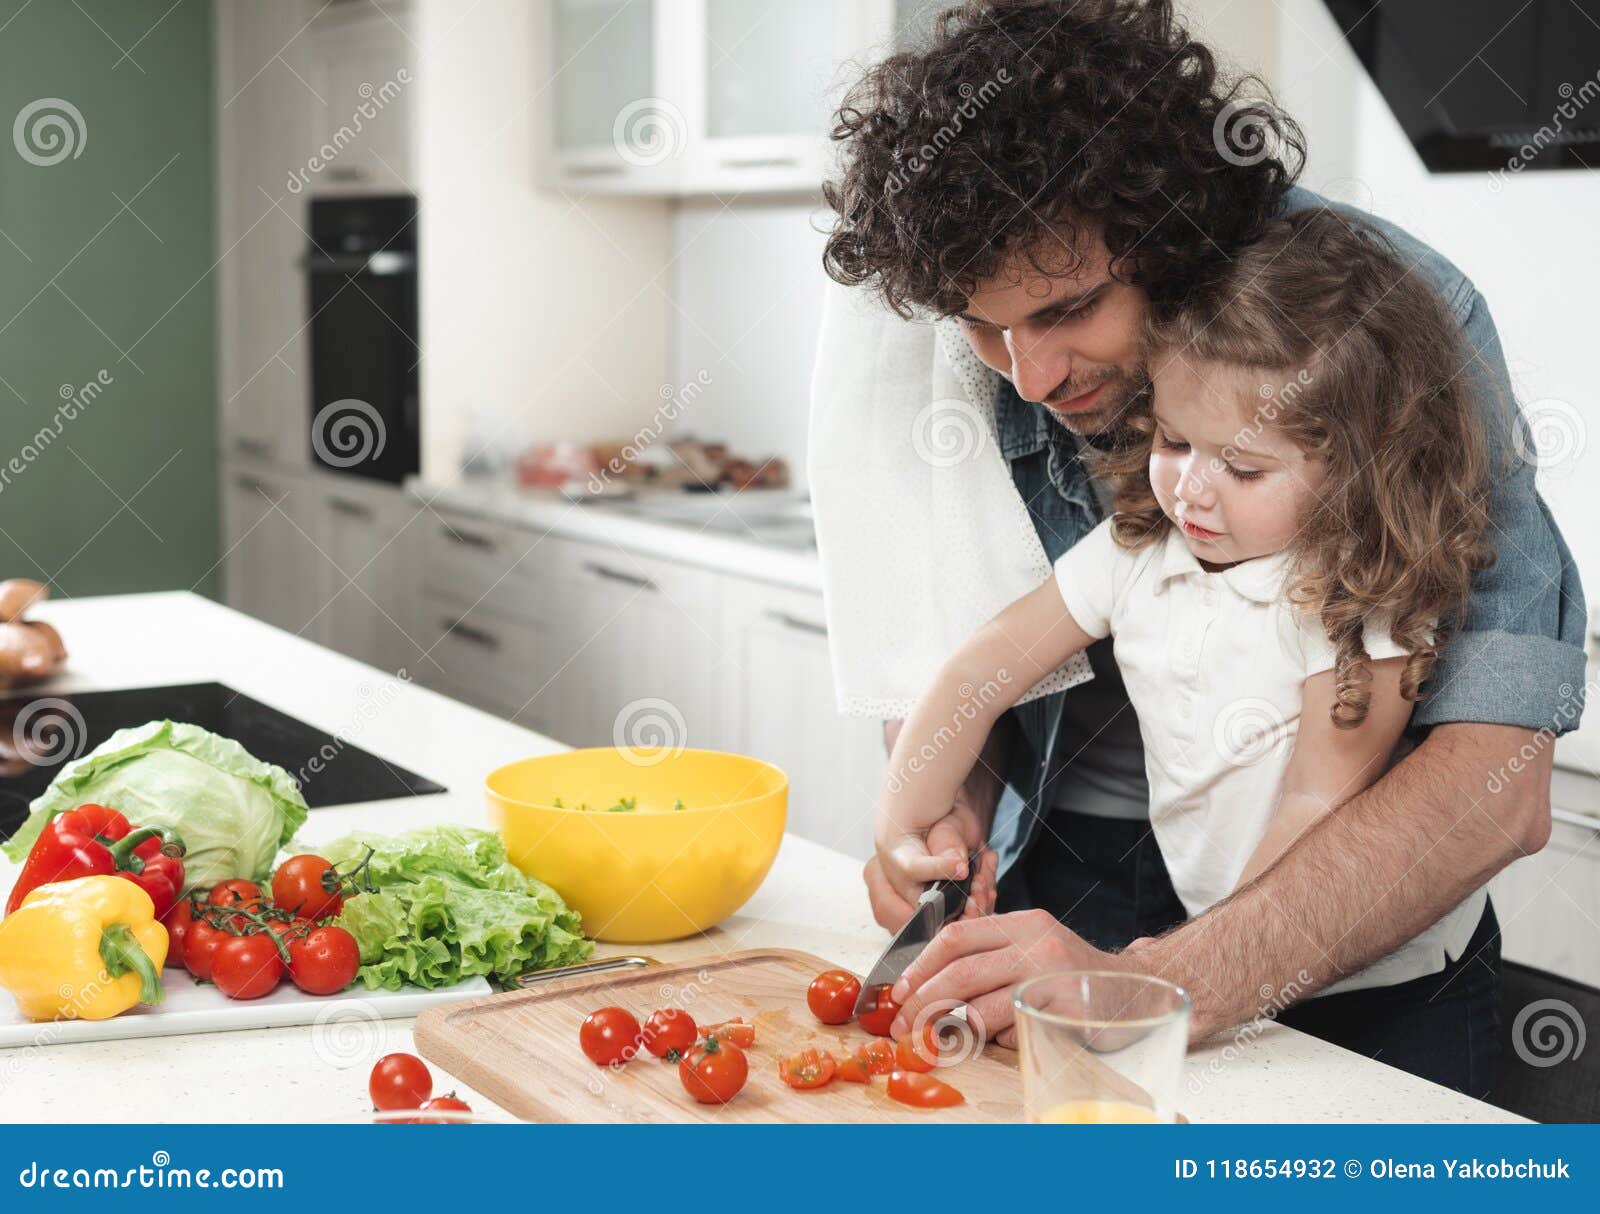 Cheerful Father and Daughter Making Salad in Kitchen Stock Photo ...